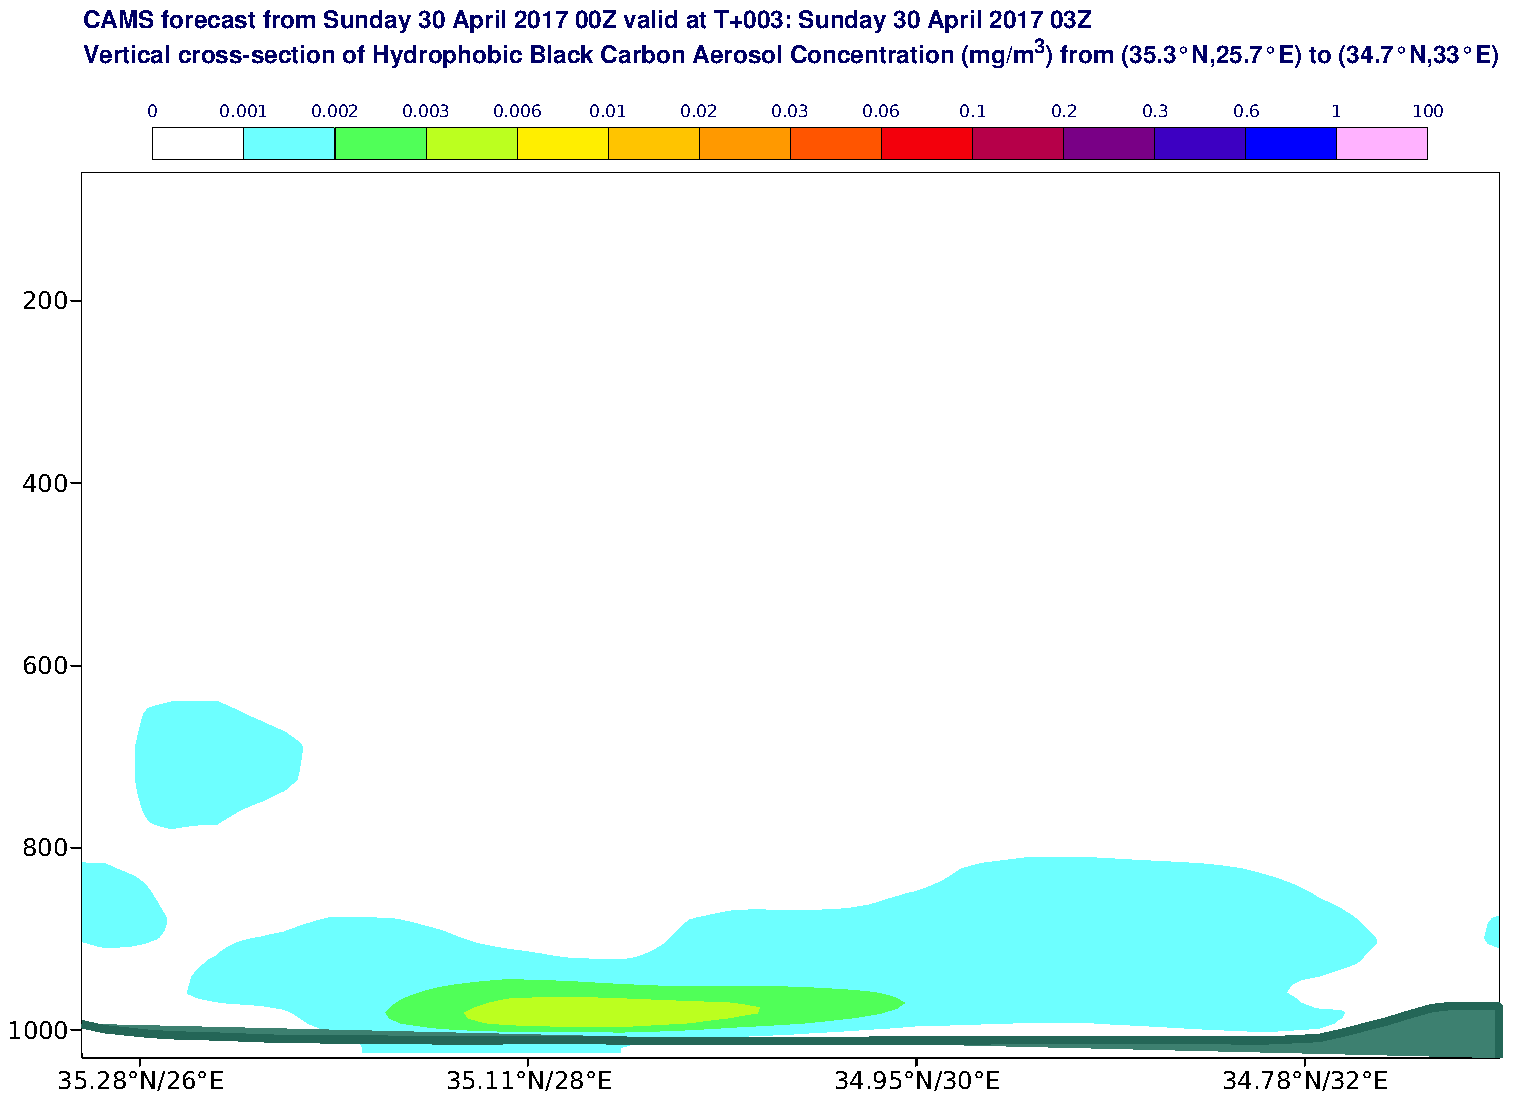 Vertical cross-section of Hydrophobic Black Carbon Aerosol Concentration (mg/m3) valid at T3 - 2017-04-30 03:00